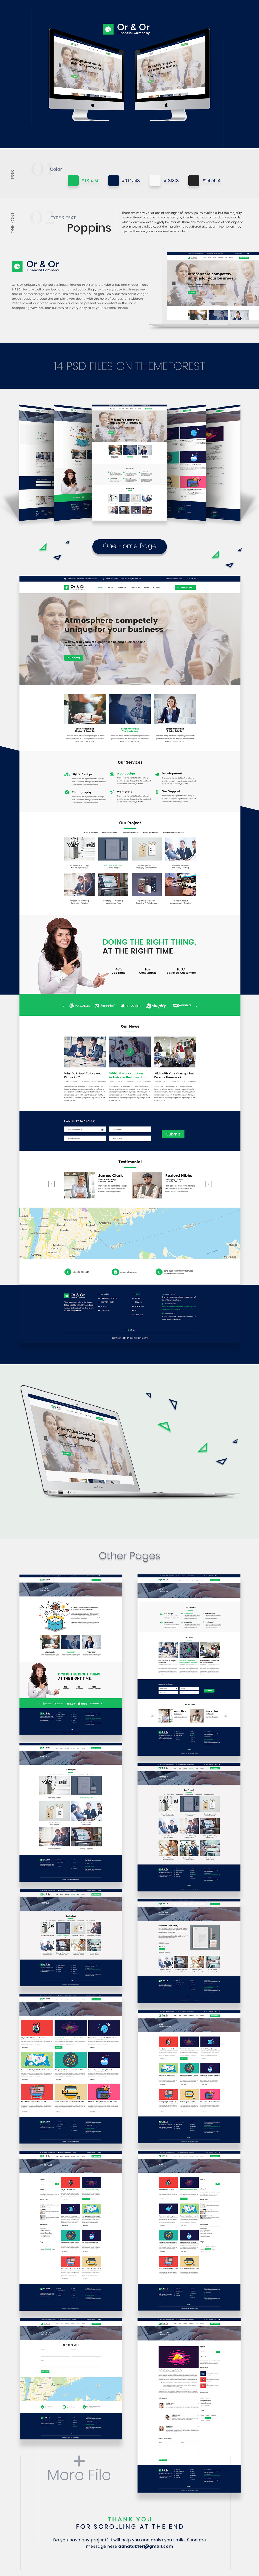 UI ux Web template desing graphic finance clean or&or business